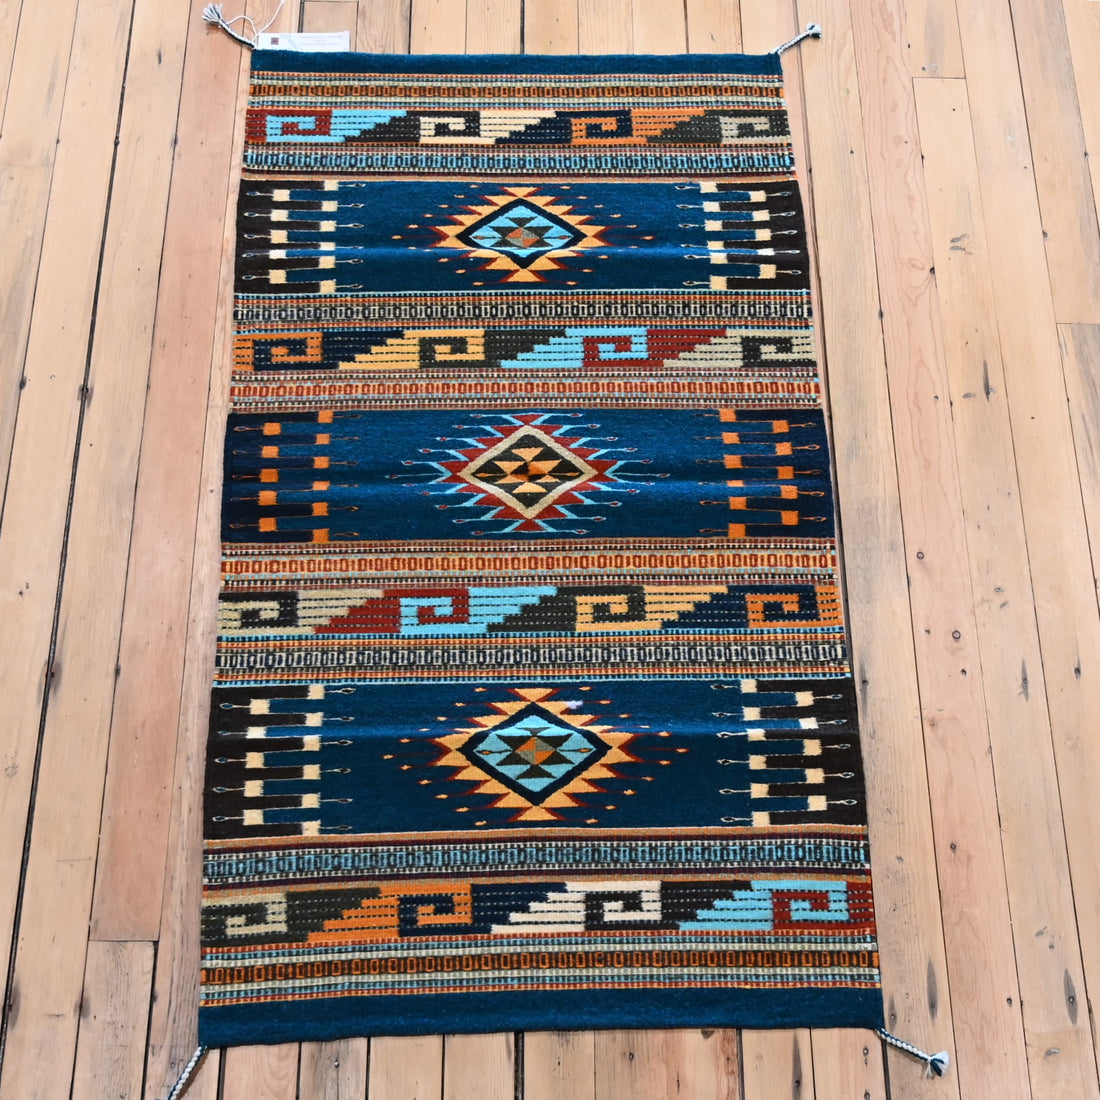 Escalante Rugs Hand Woven by Efrain Gonzales view of rug